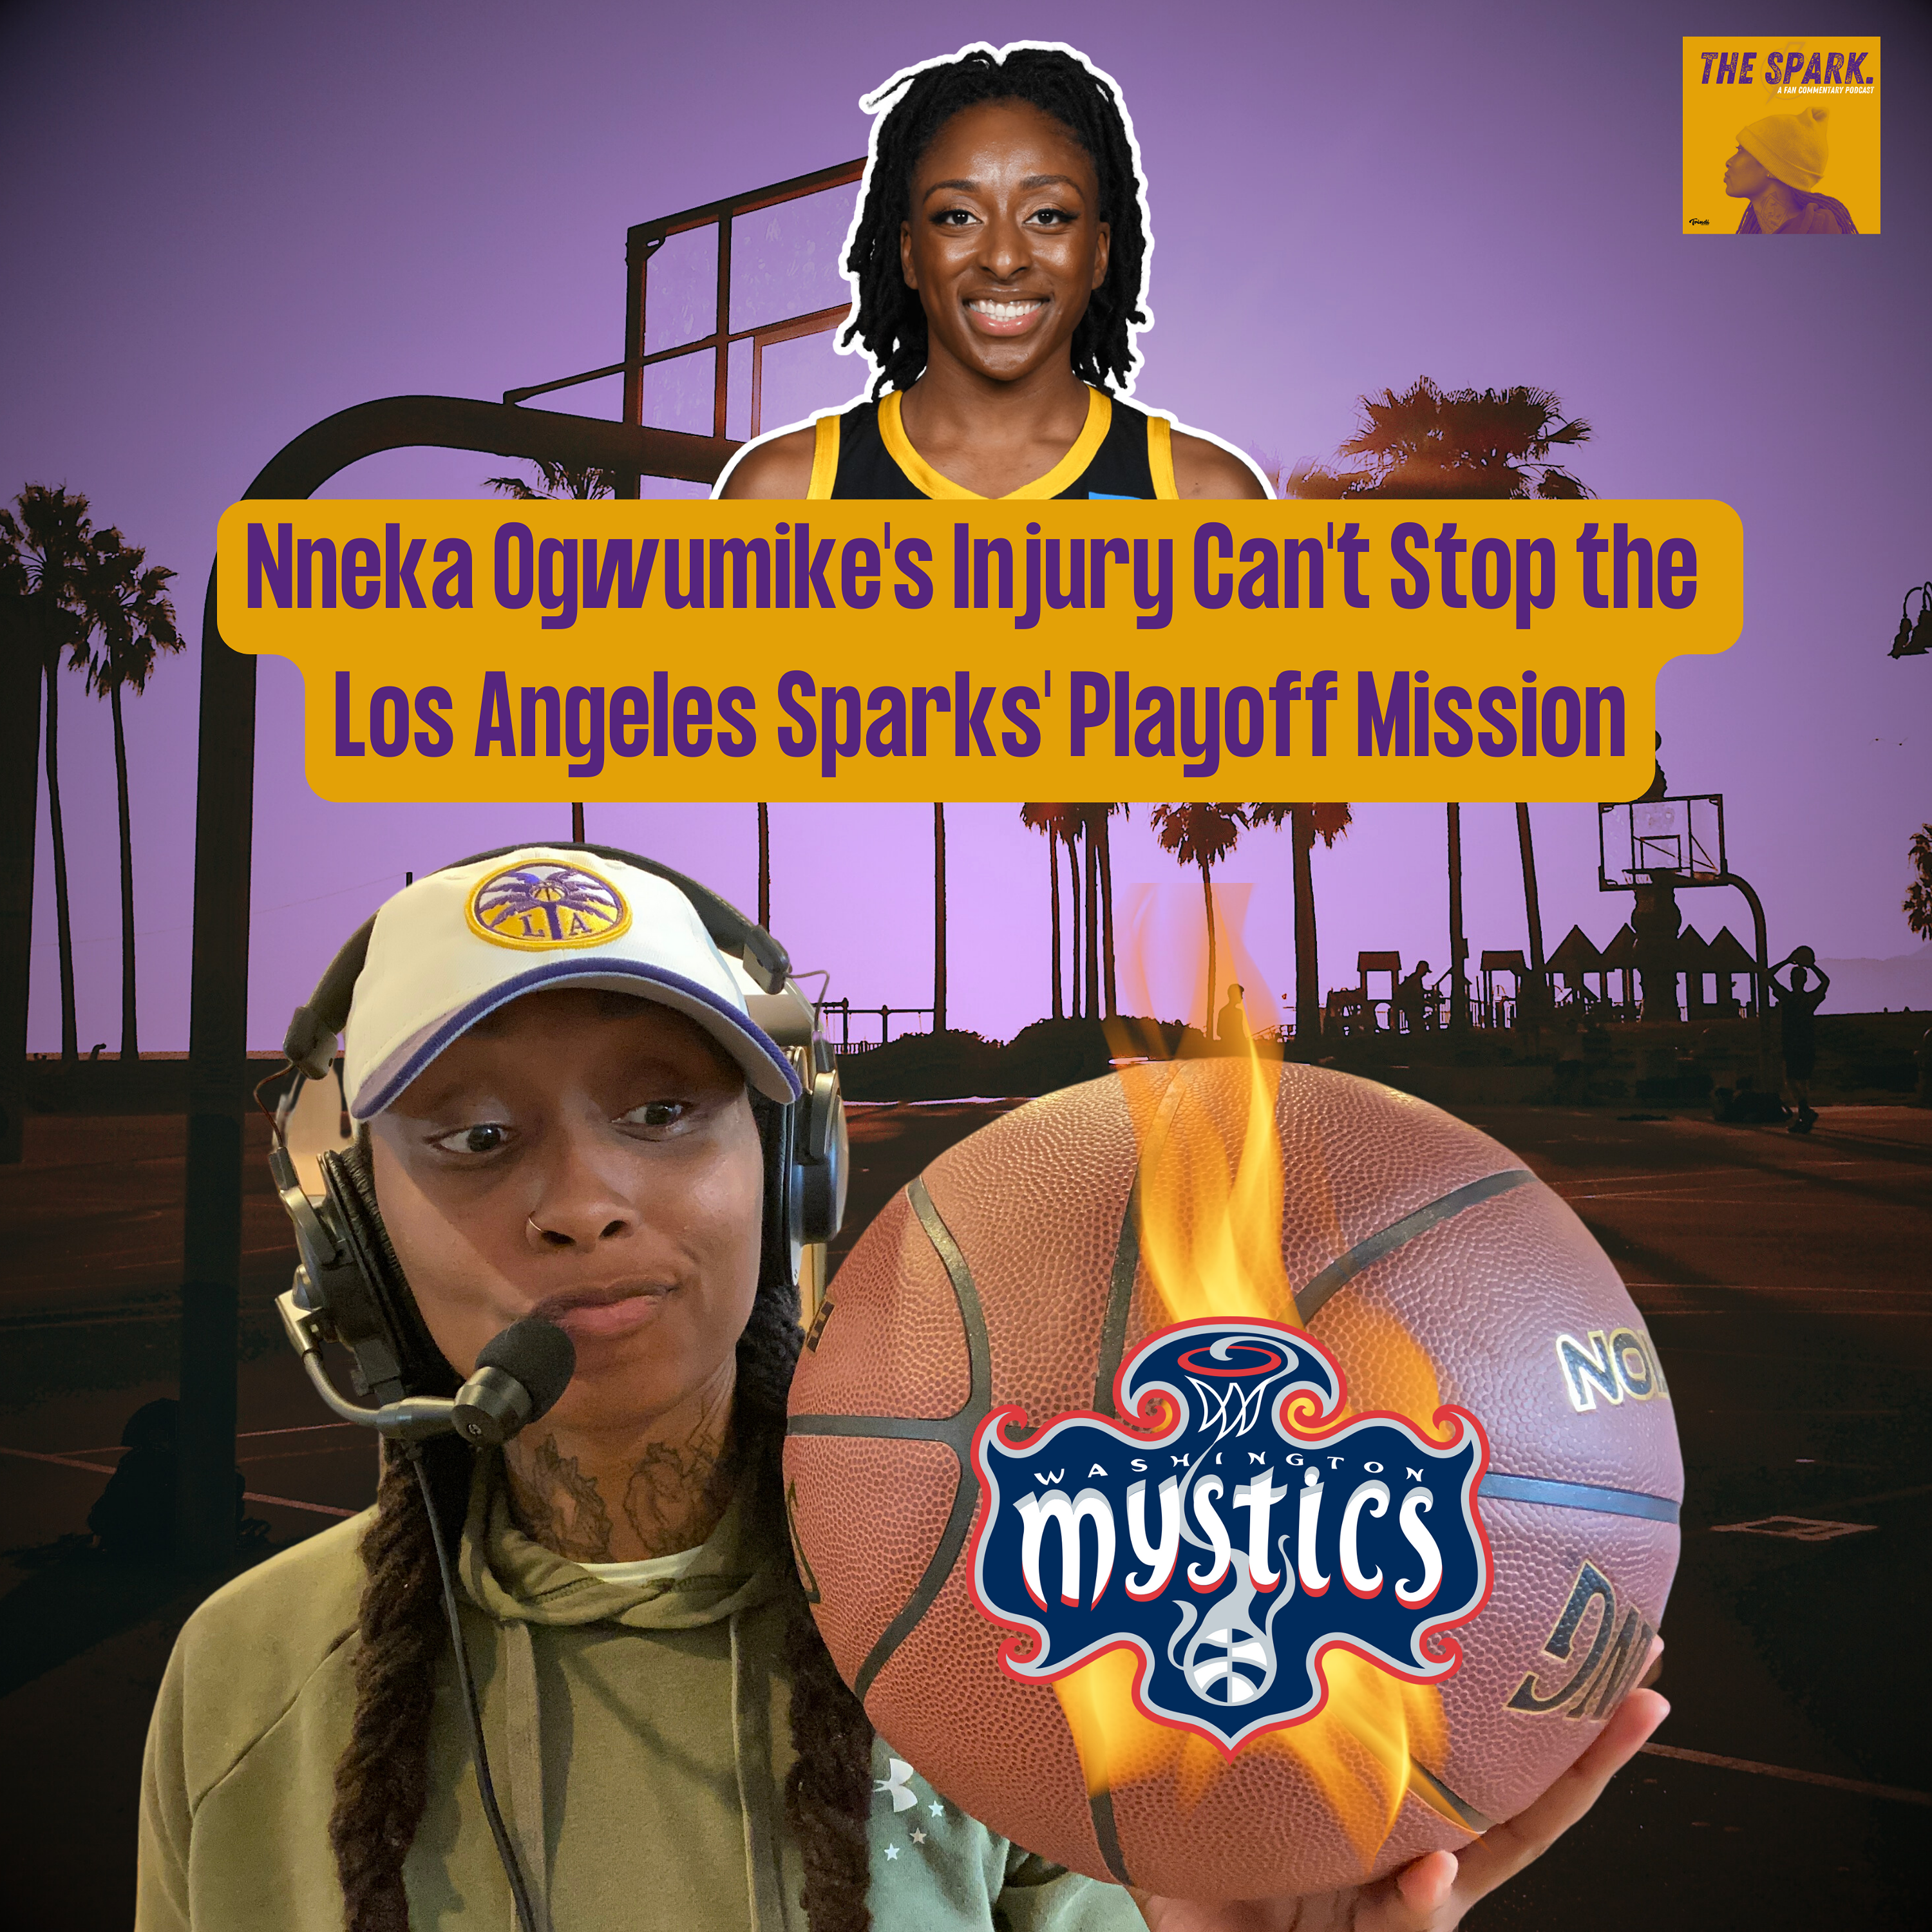 Nneka Ogwumike's Injury Can't Stop the Los Angeles Sparks' Playoff Mission